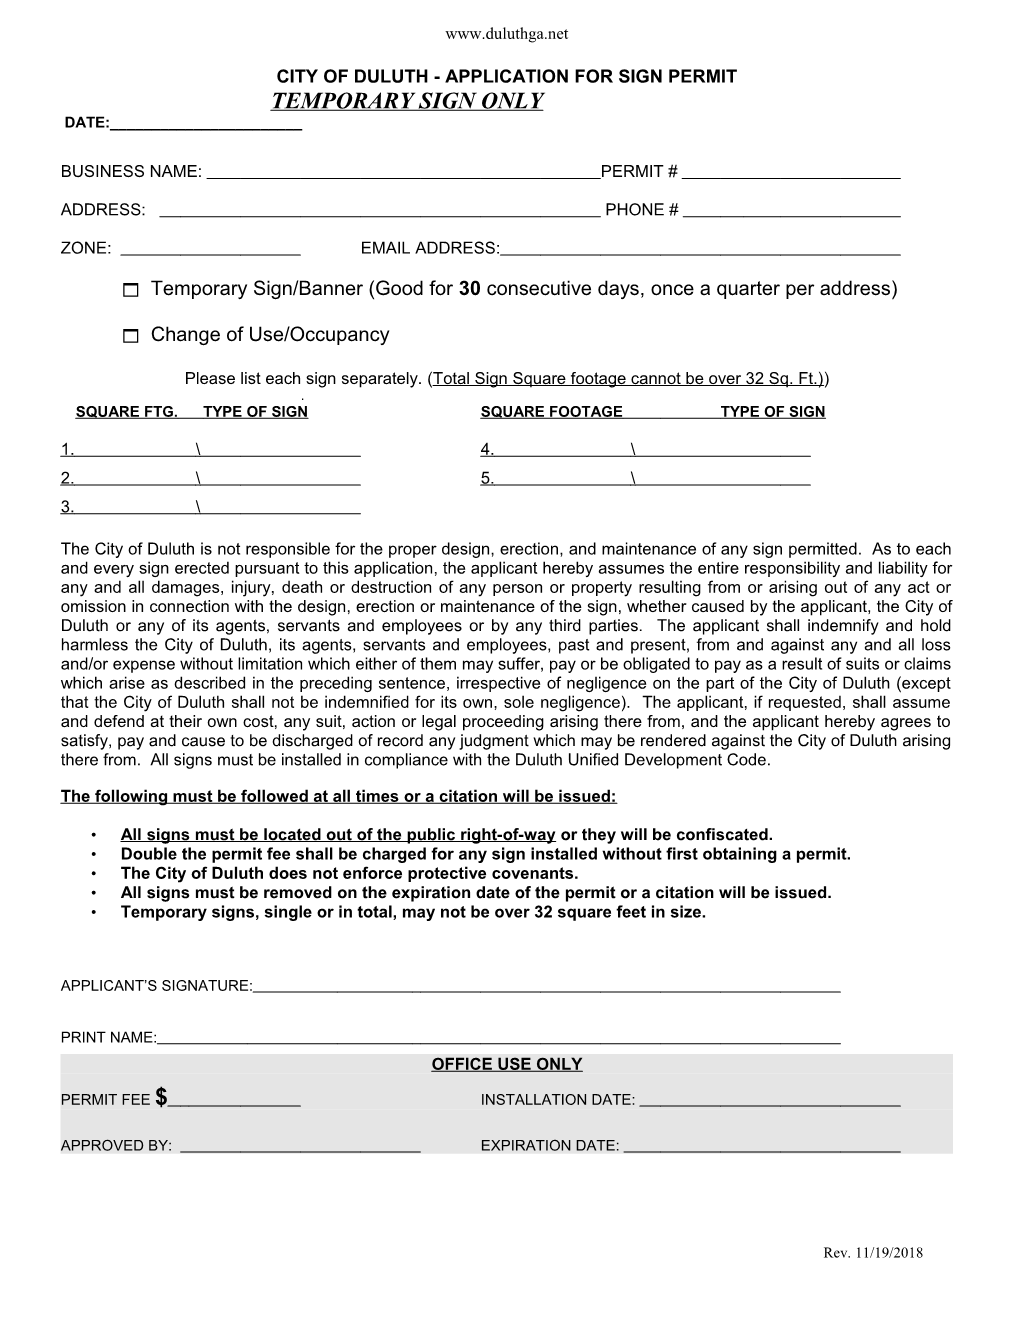 City of Duluth - Application for Sign Permit